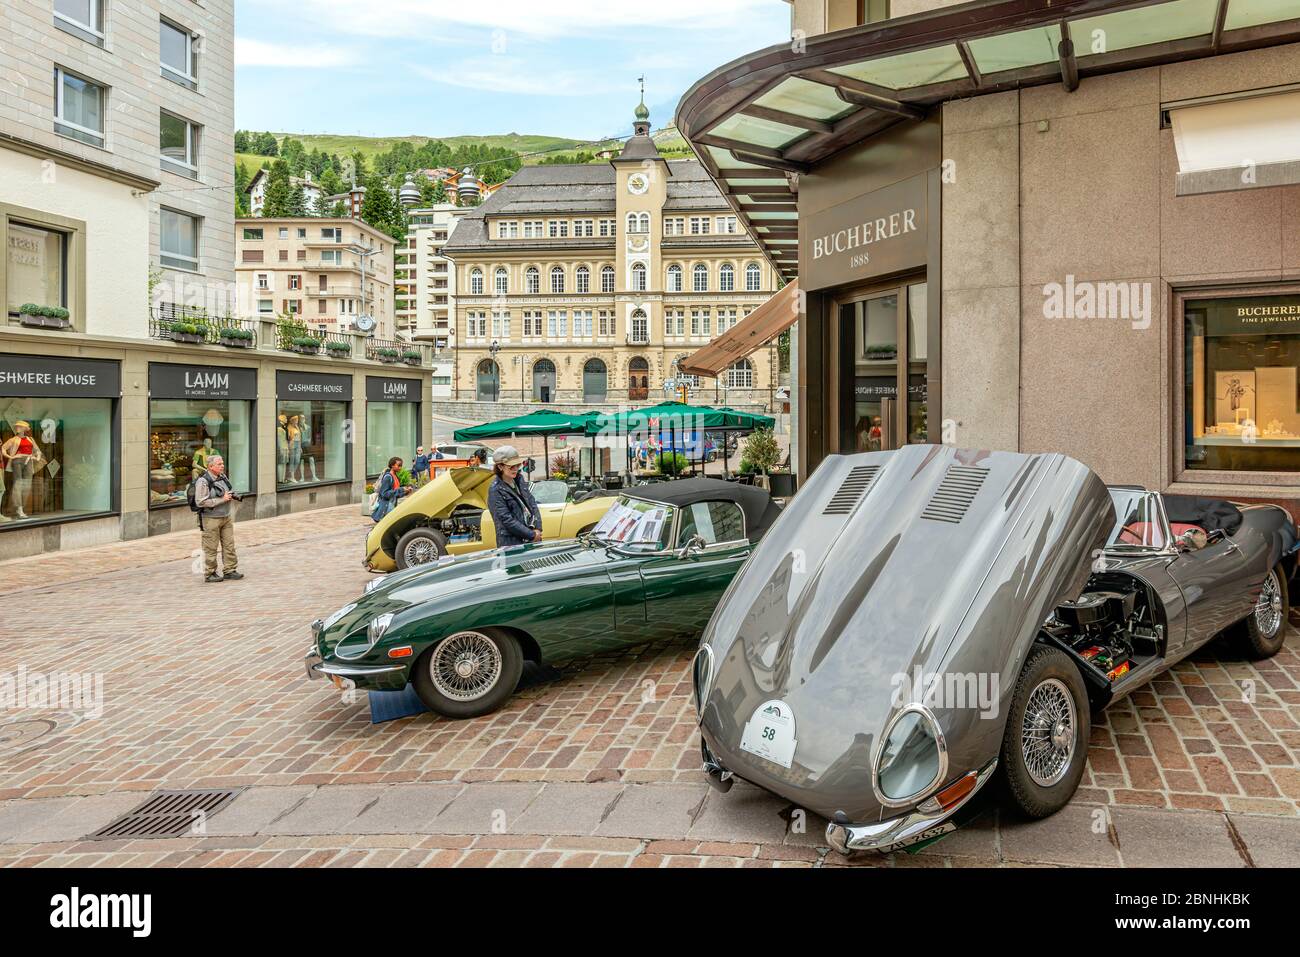 Jaguar vintage cars on display during the British Classic Car Meeting 2019, St.Moritz, Grisons, Switzerland Stock Photo